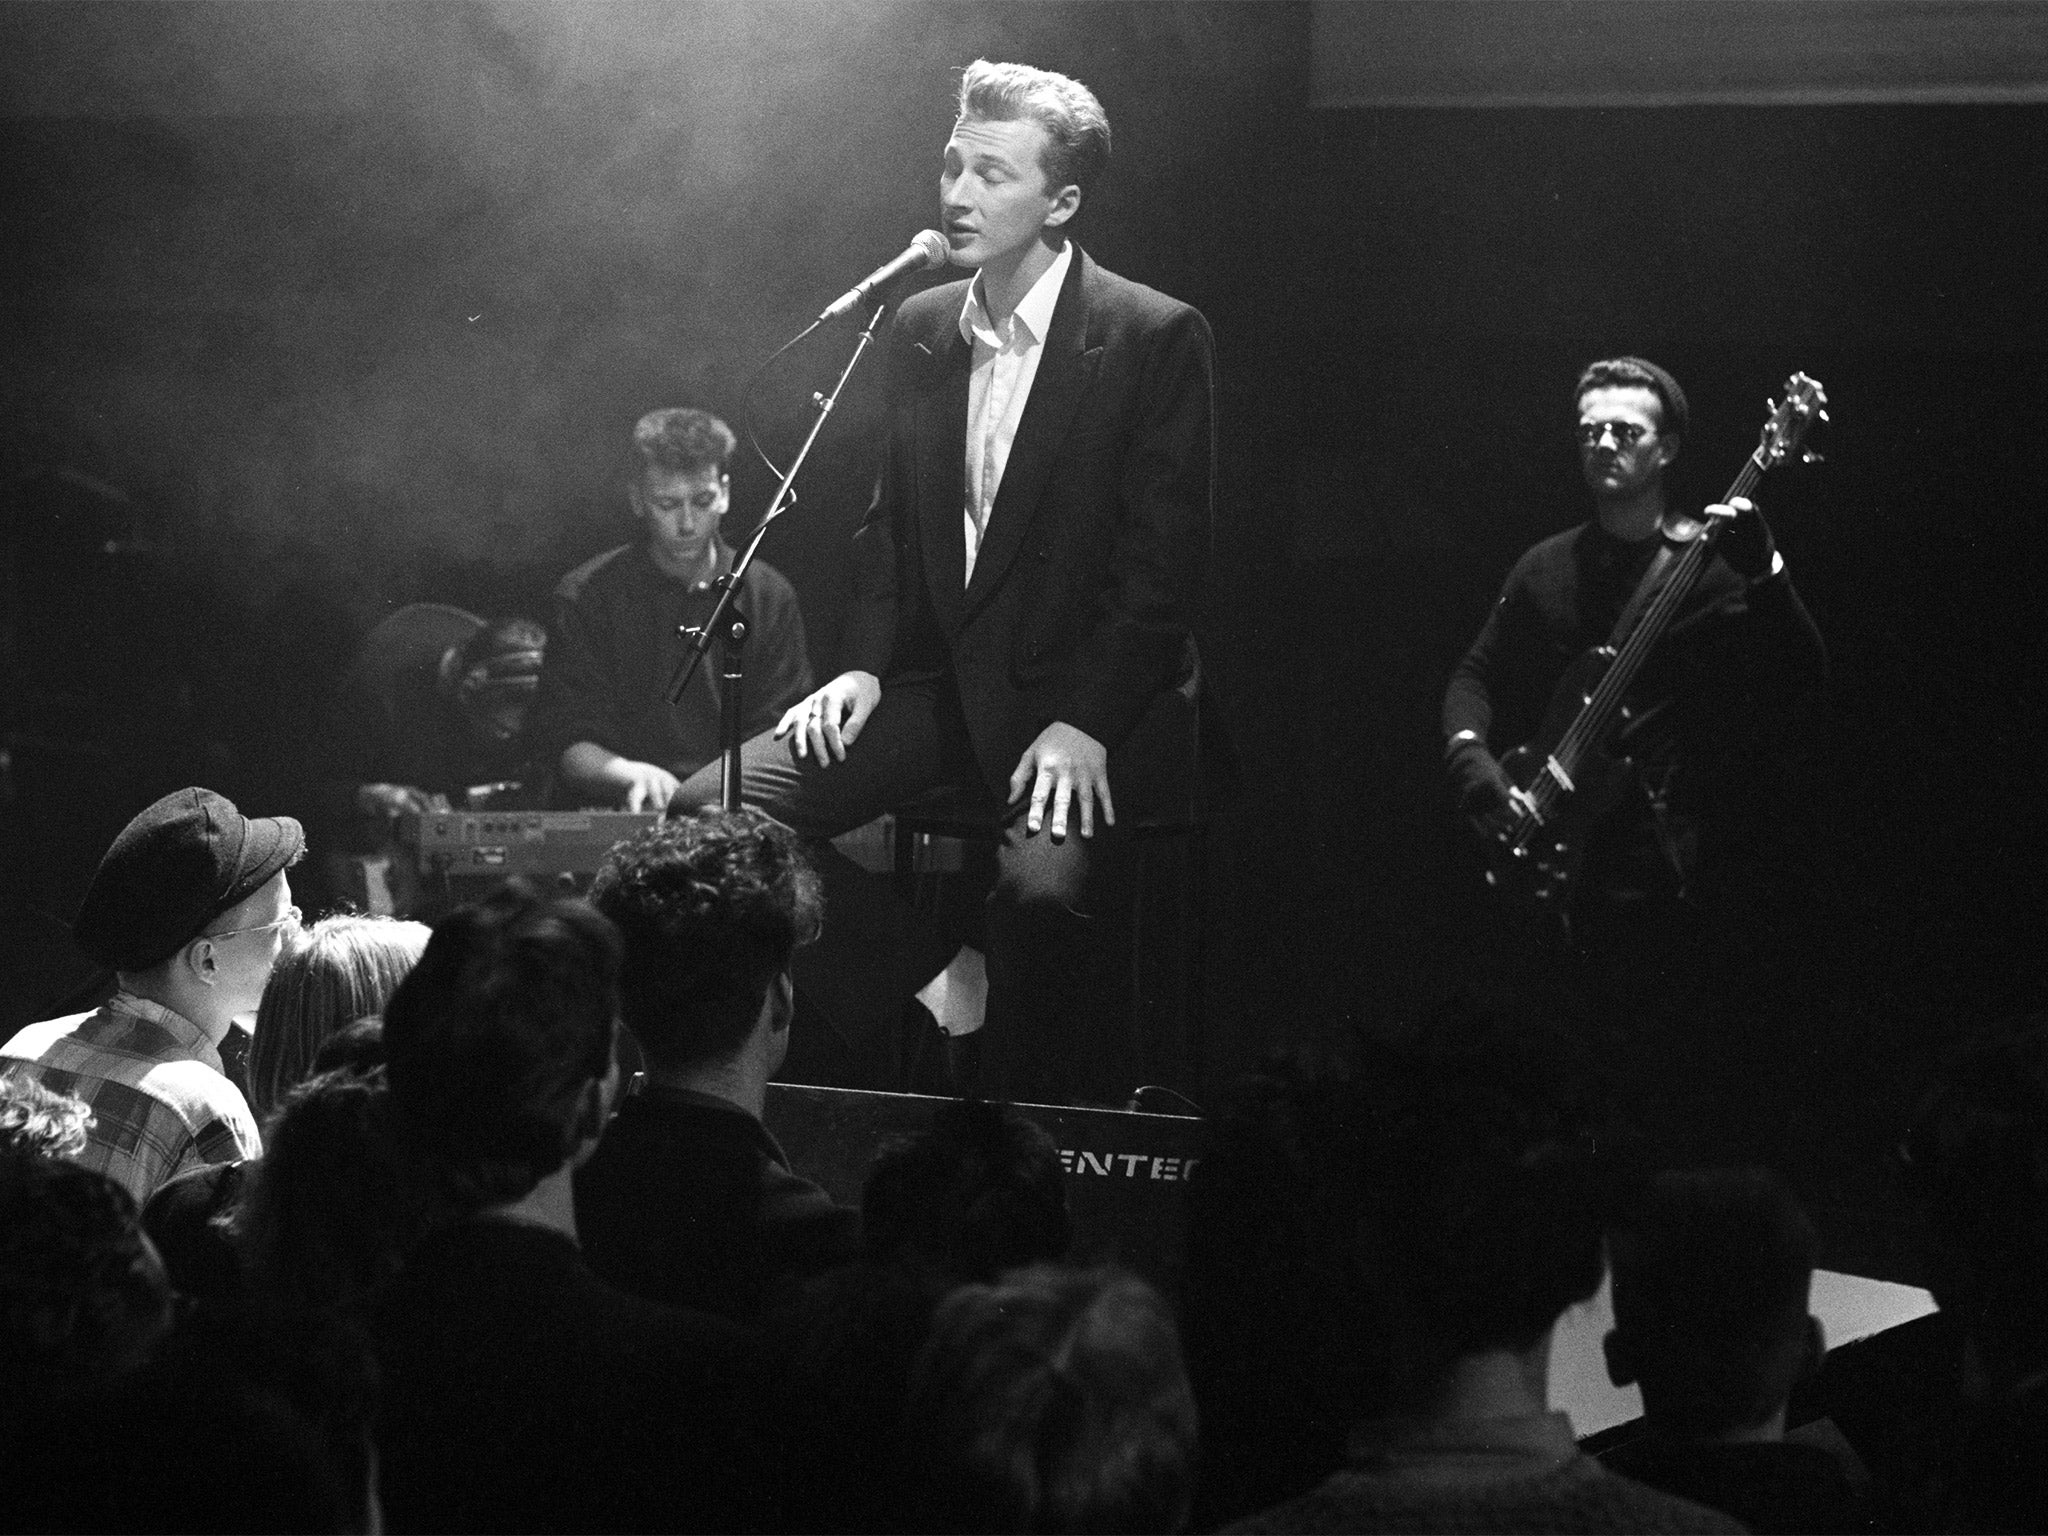 Vearncombe on the Channel 4 show ‘The Tube’ in 1987